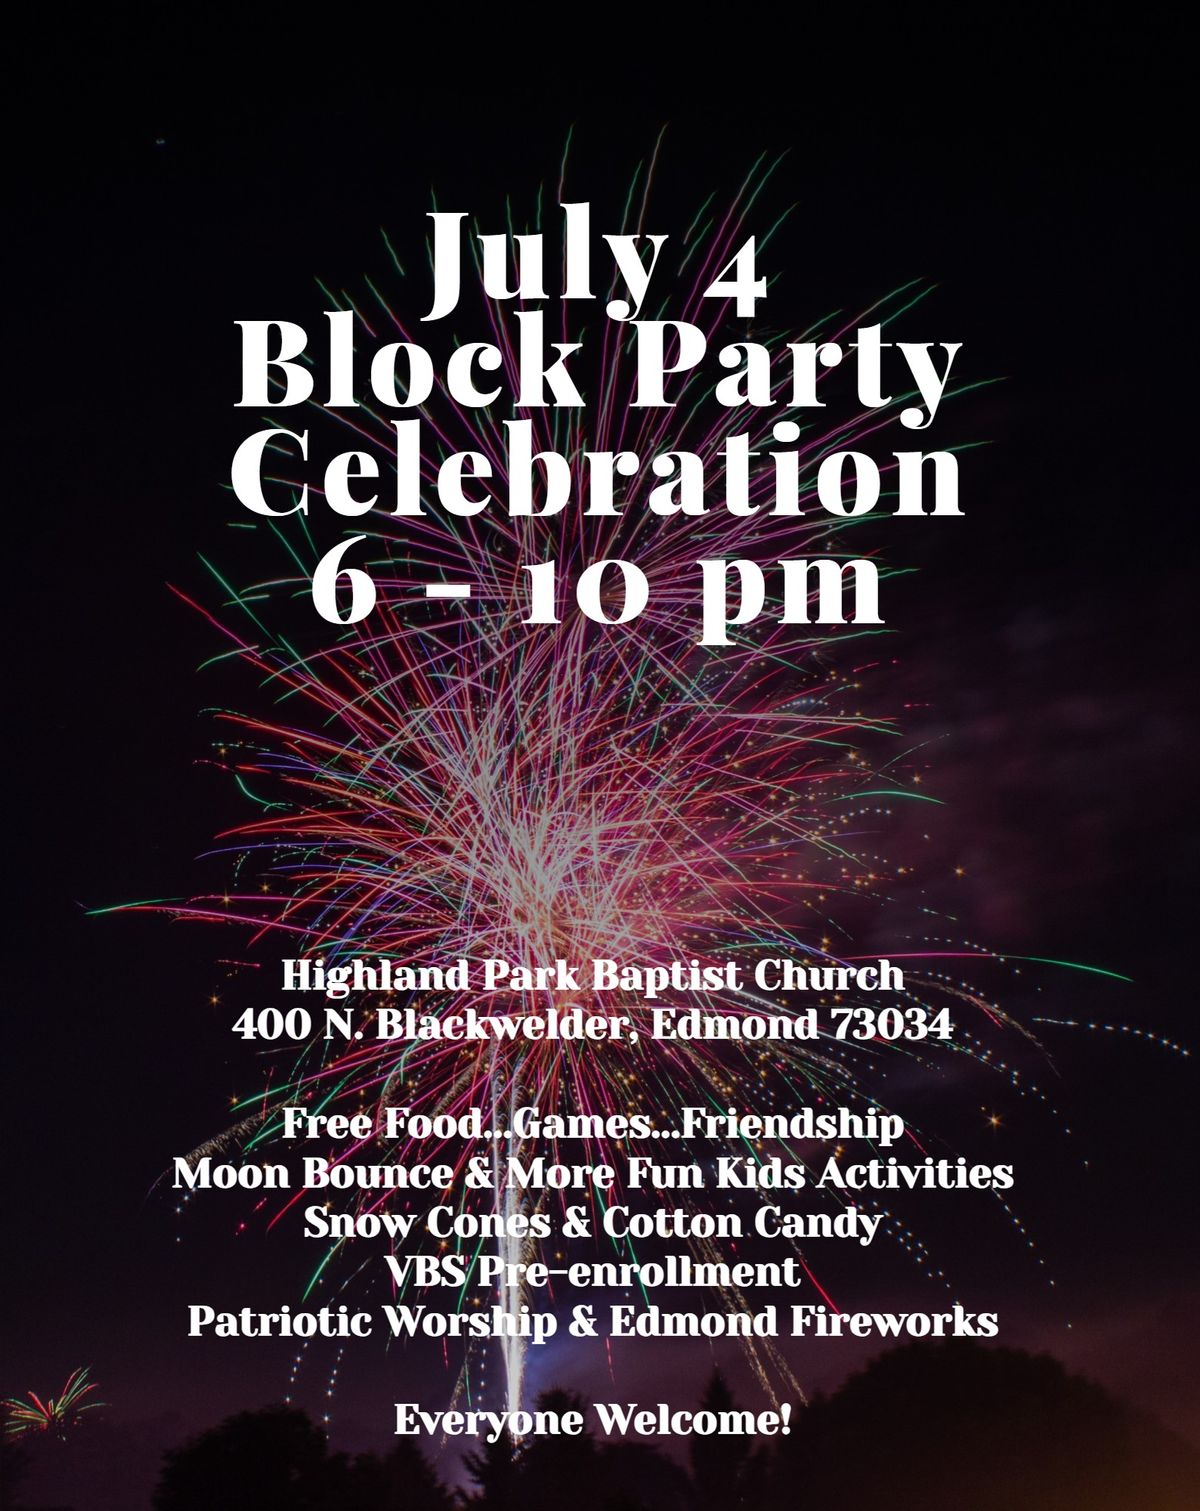 July 4 Block Party Celebration and VBS Pre-enrollment